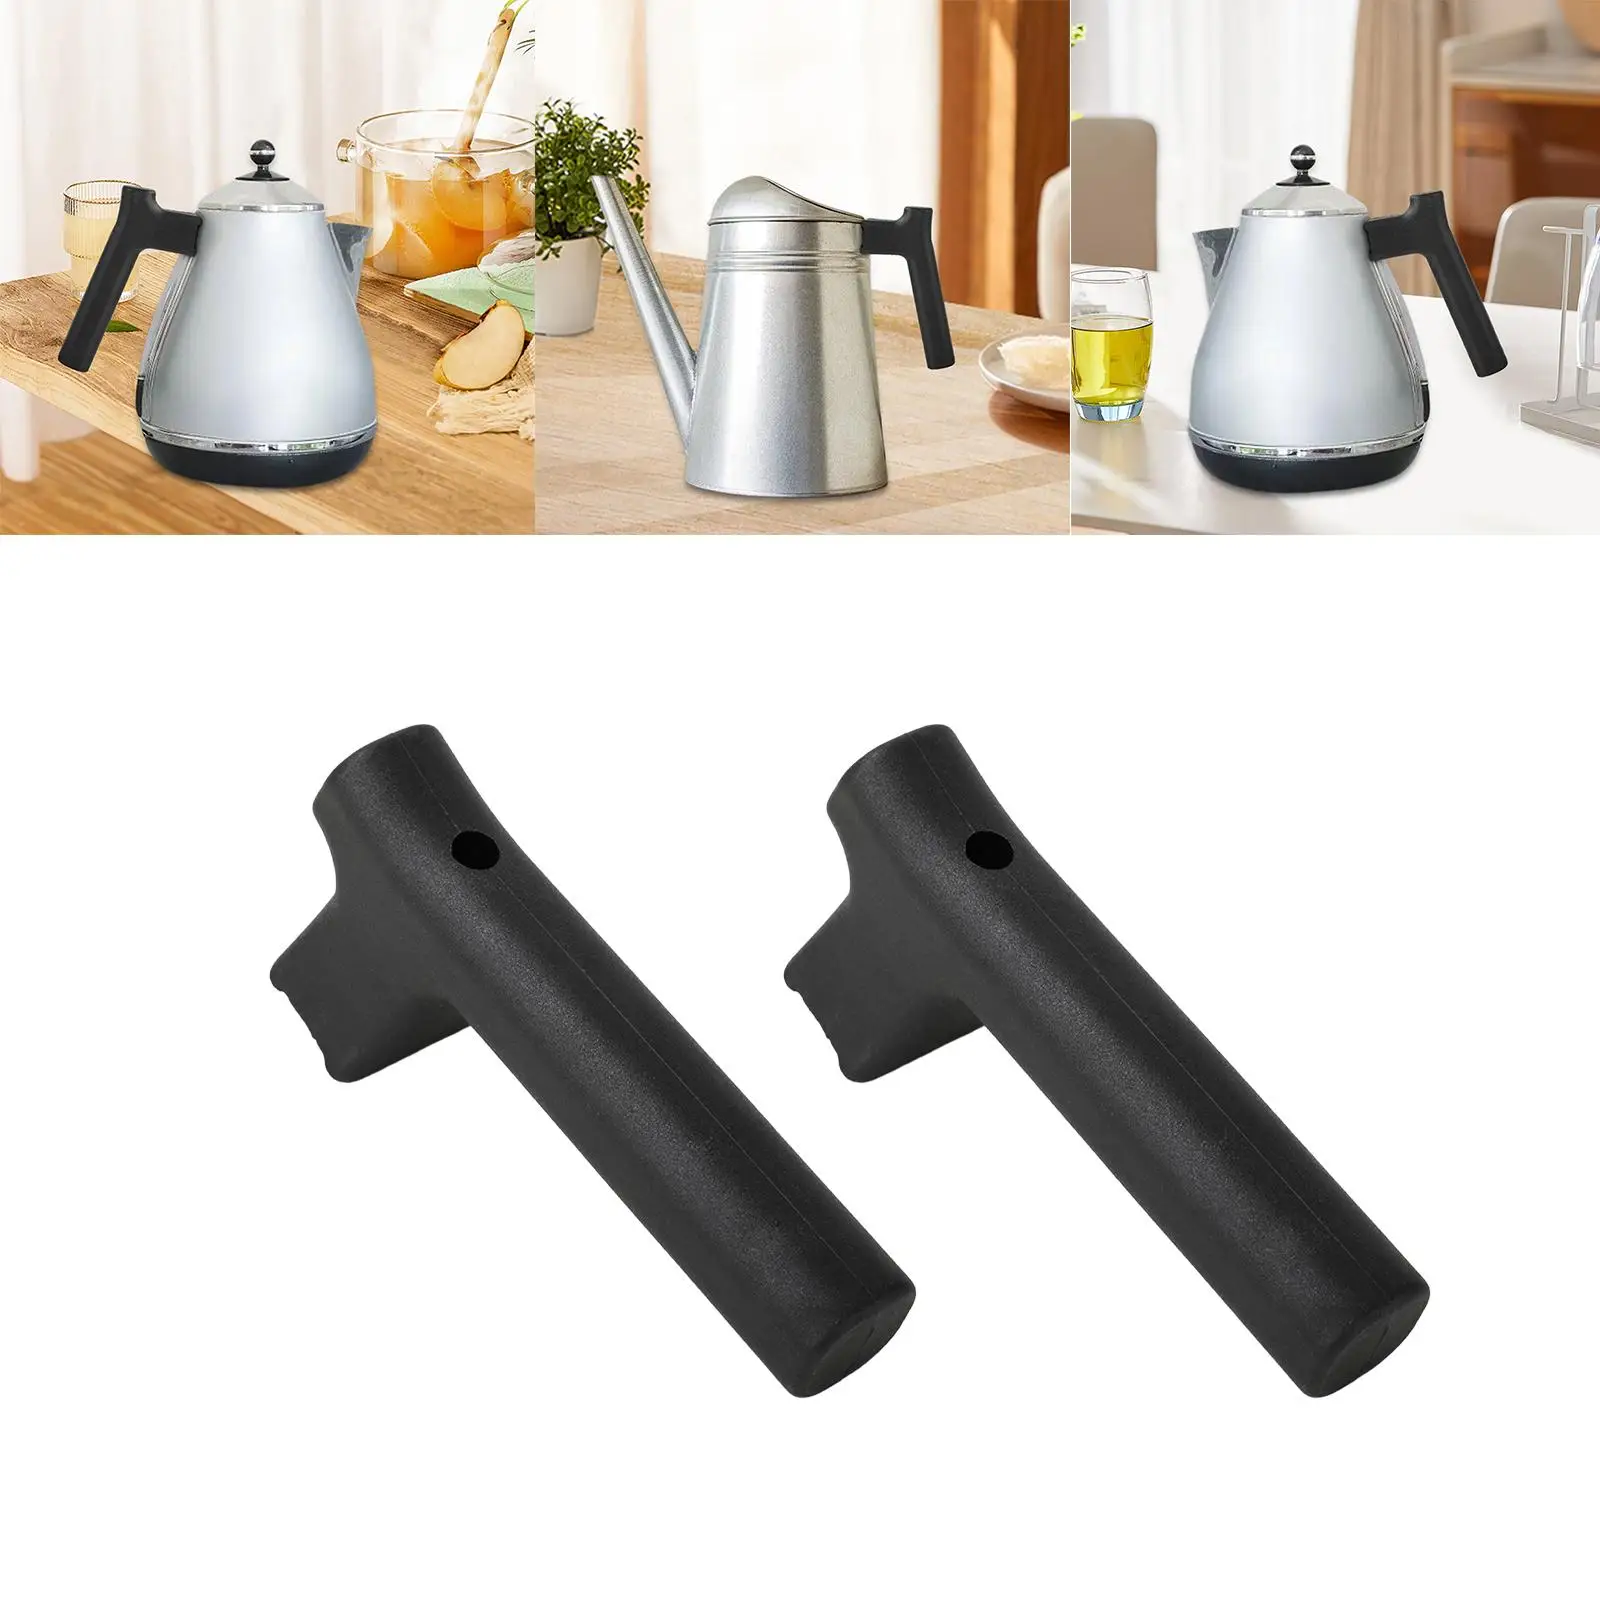 2 Pieces Kettle Handle Holder Replaces Part Wide Applications Professional Coffee Machines Tool for Kitchen Utensils Supplies